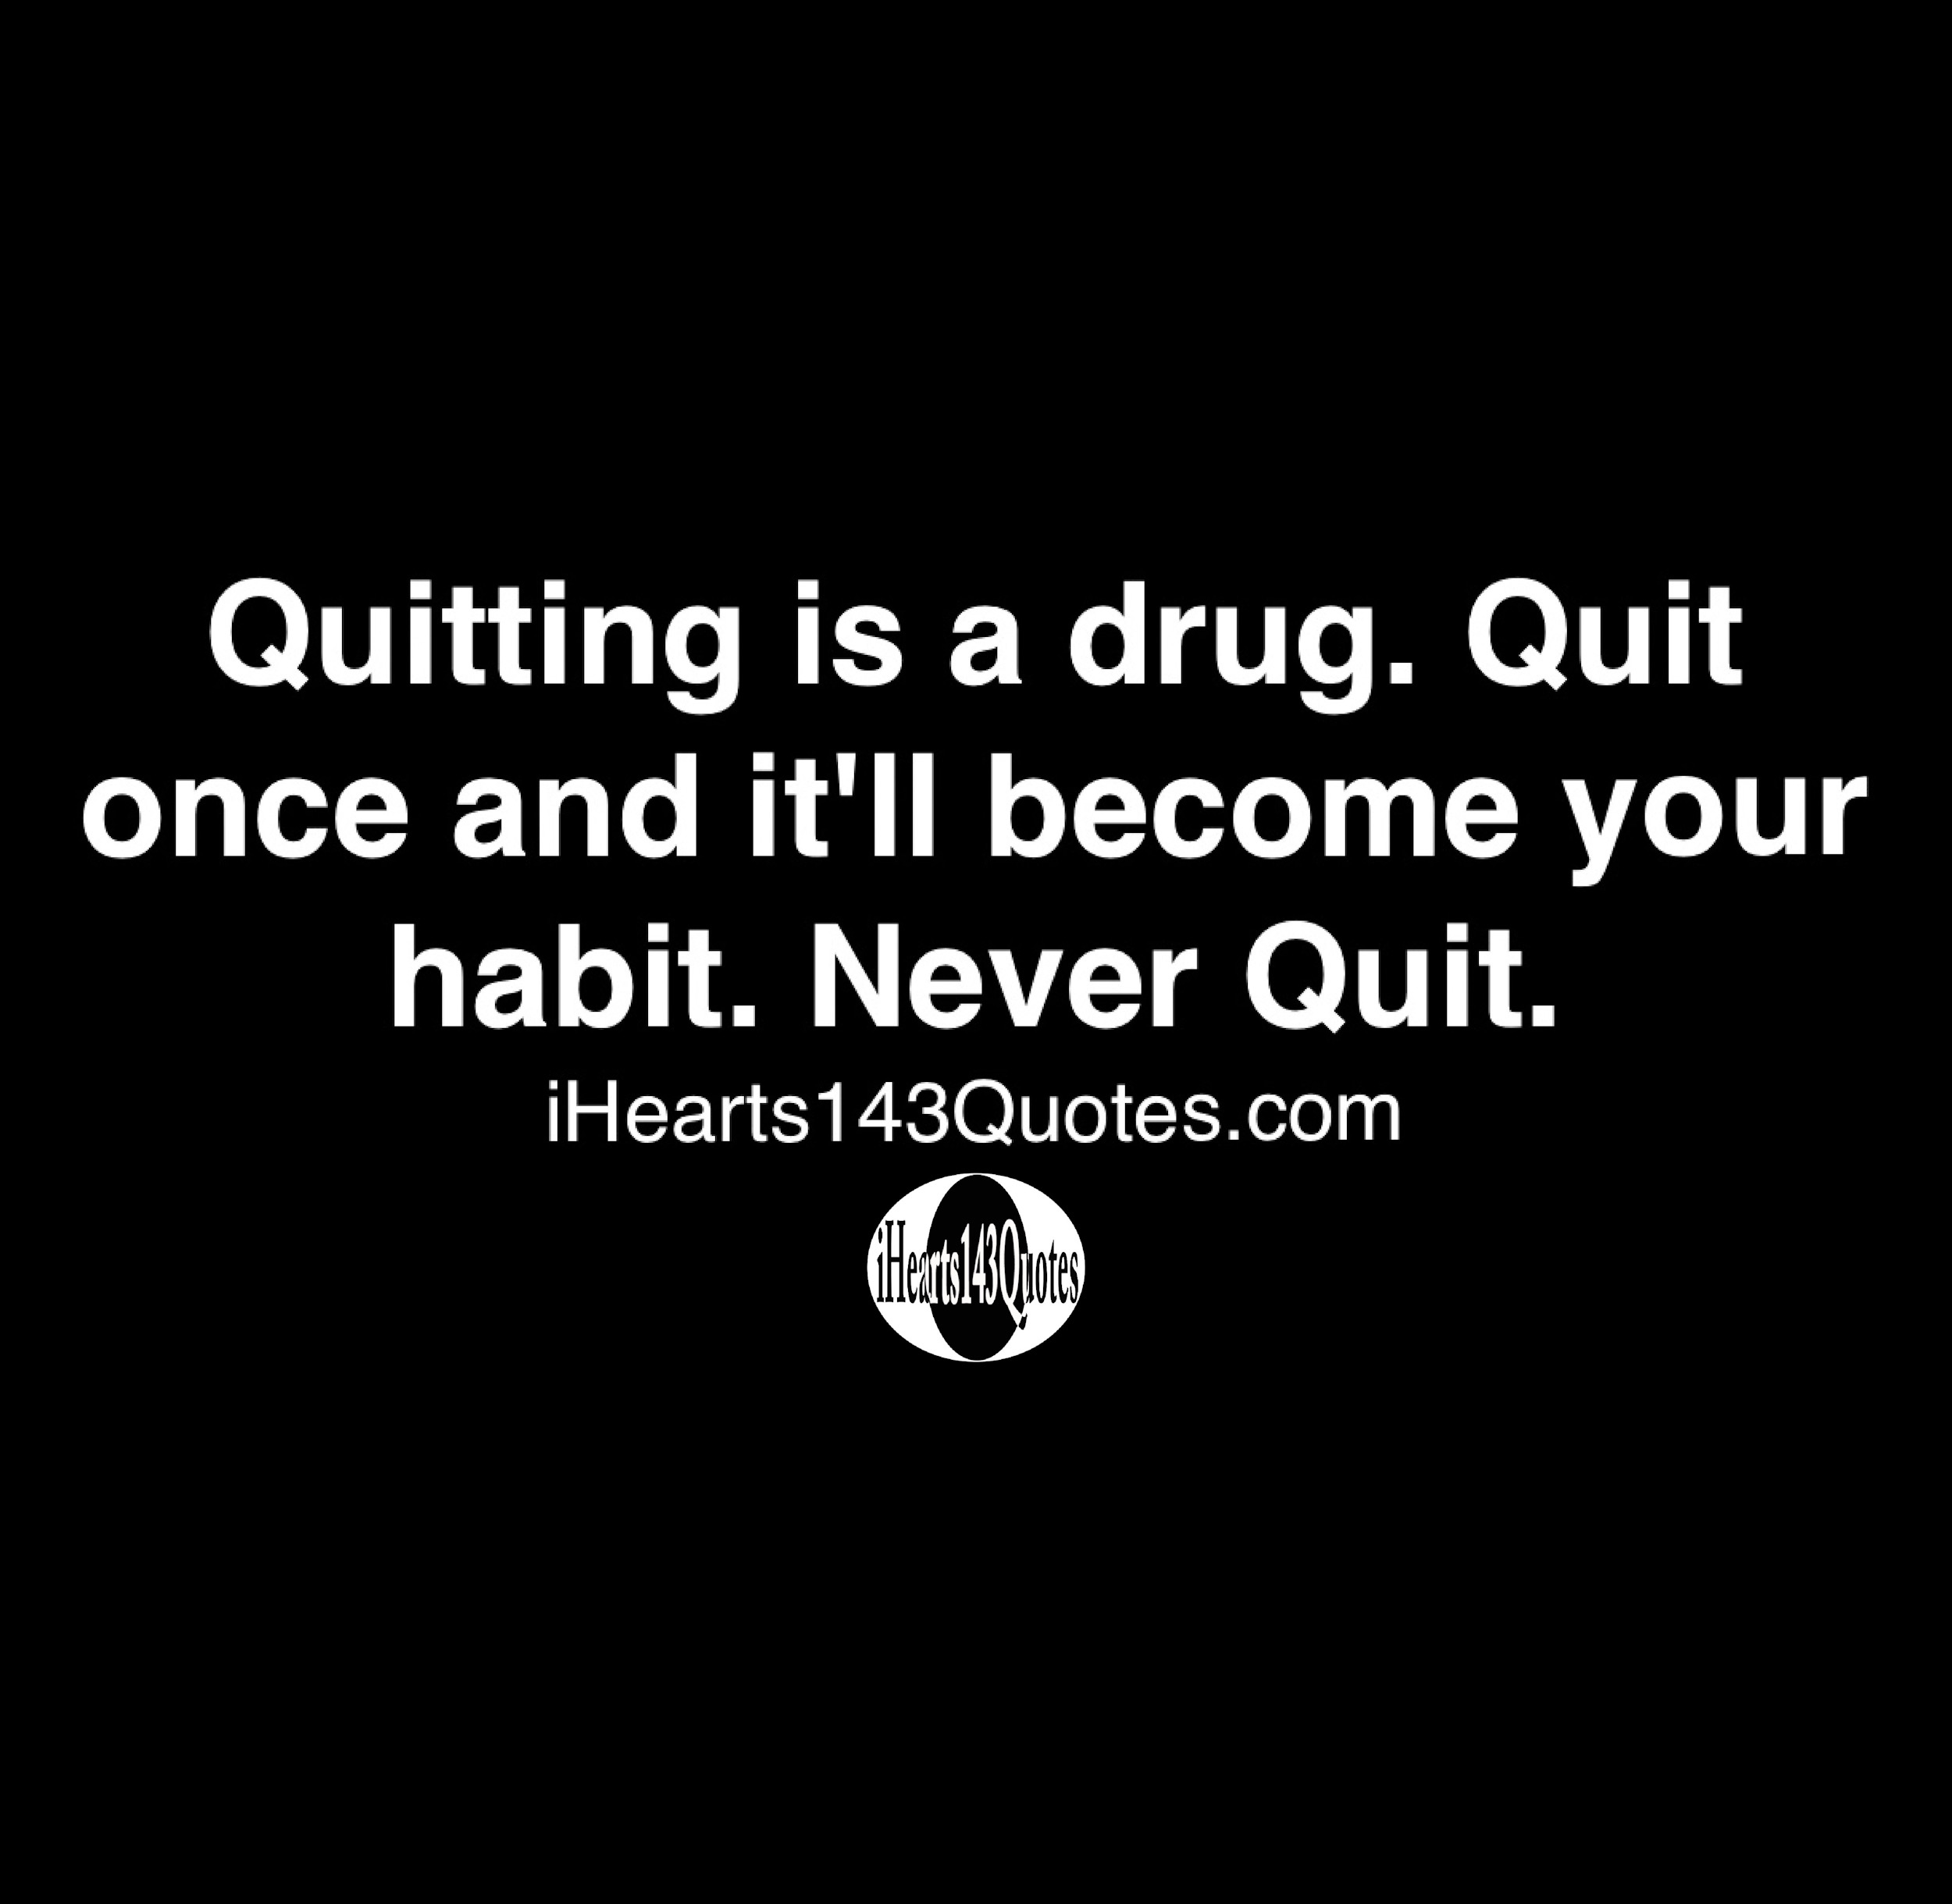 educational never quit quotes